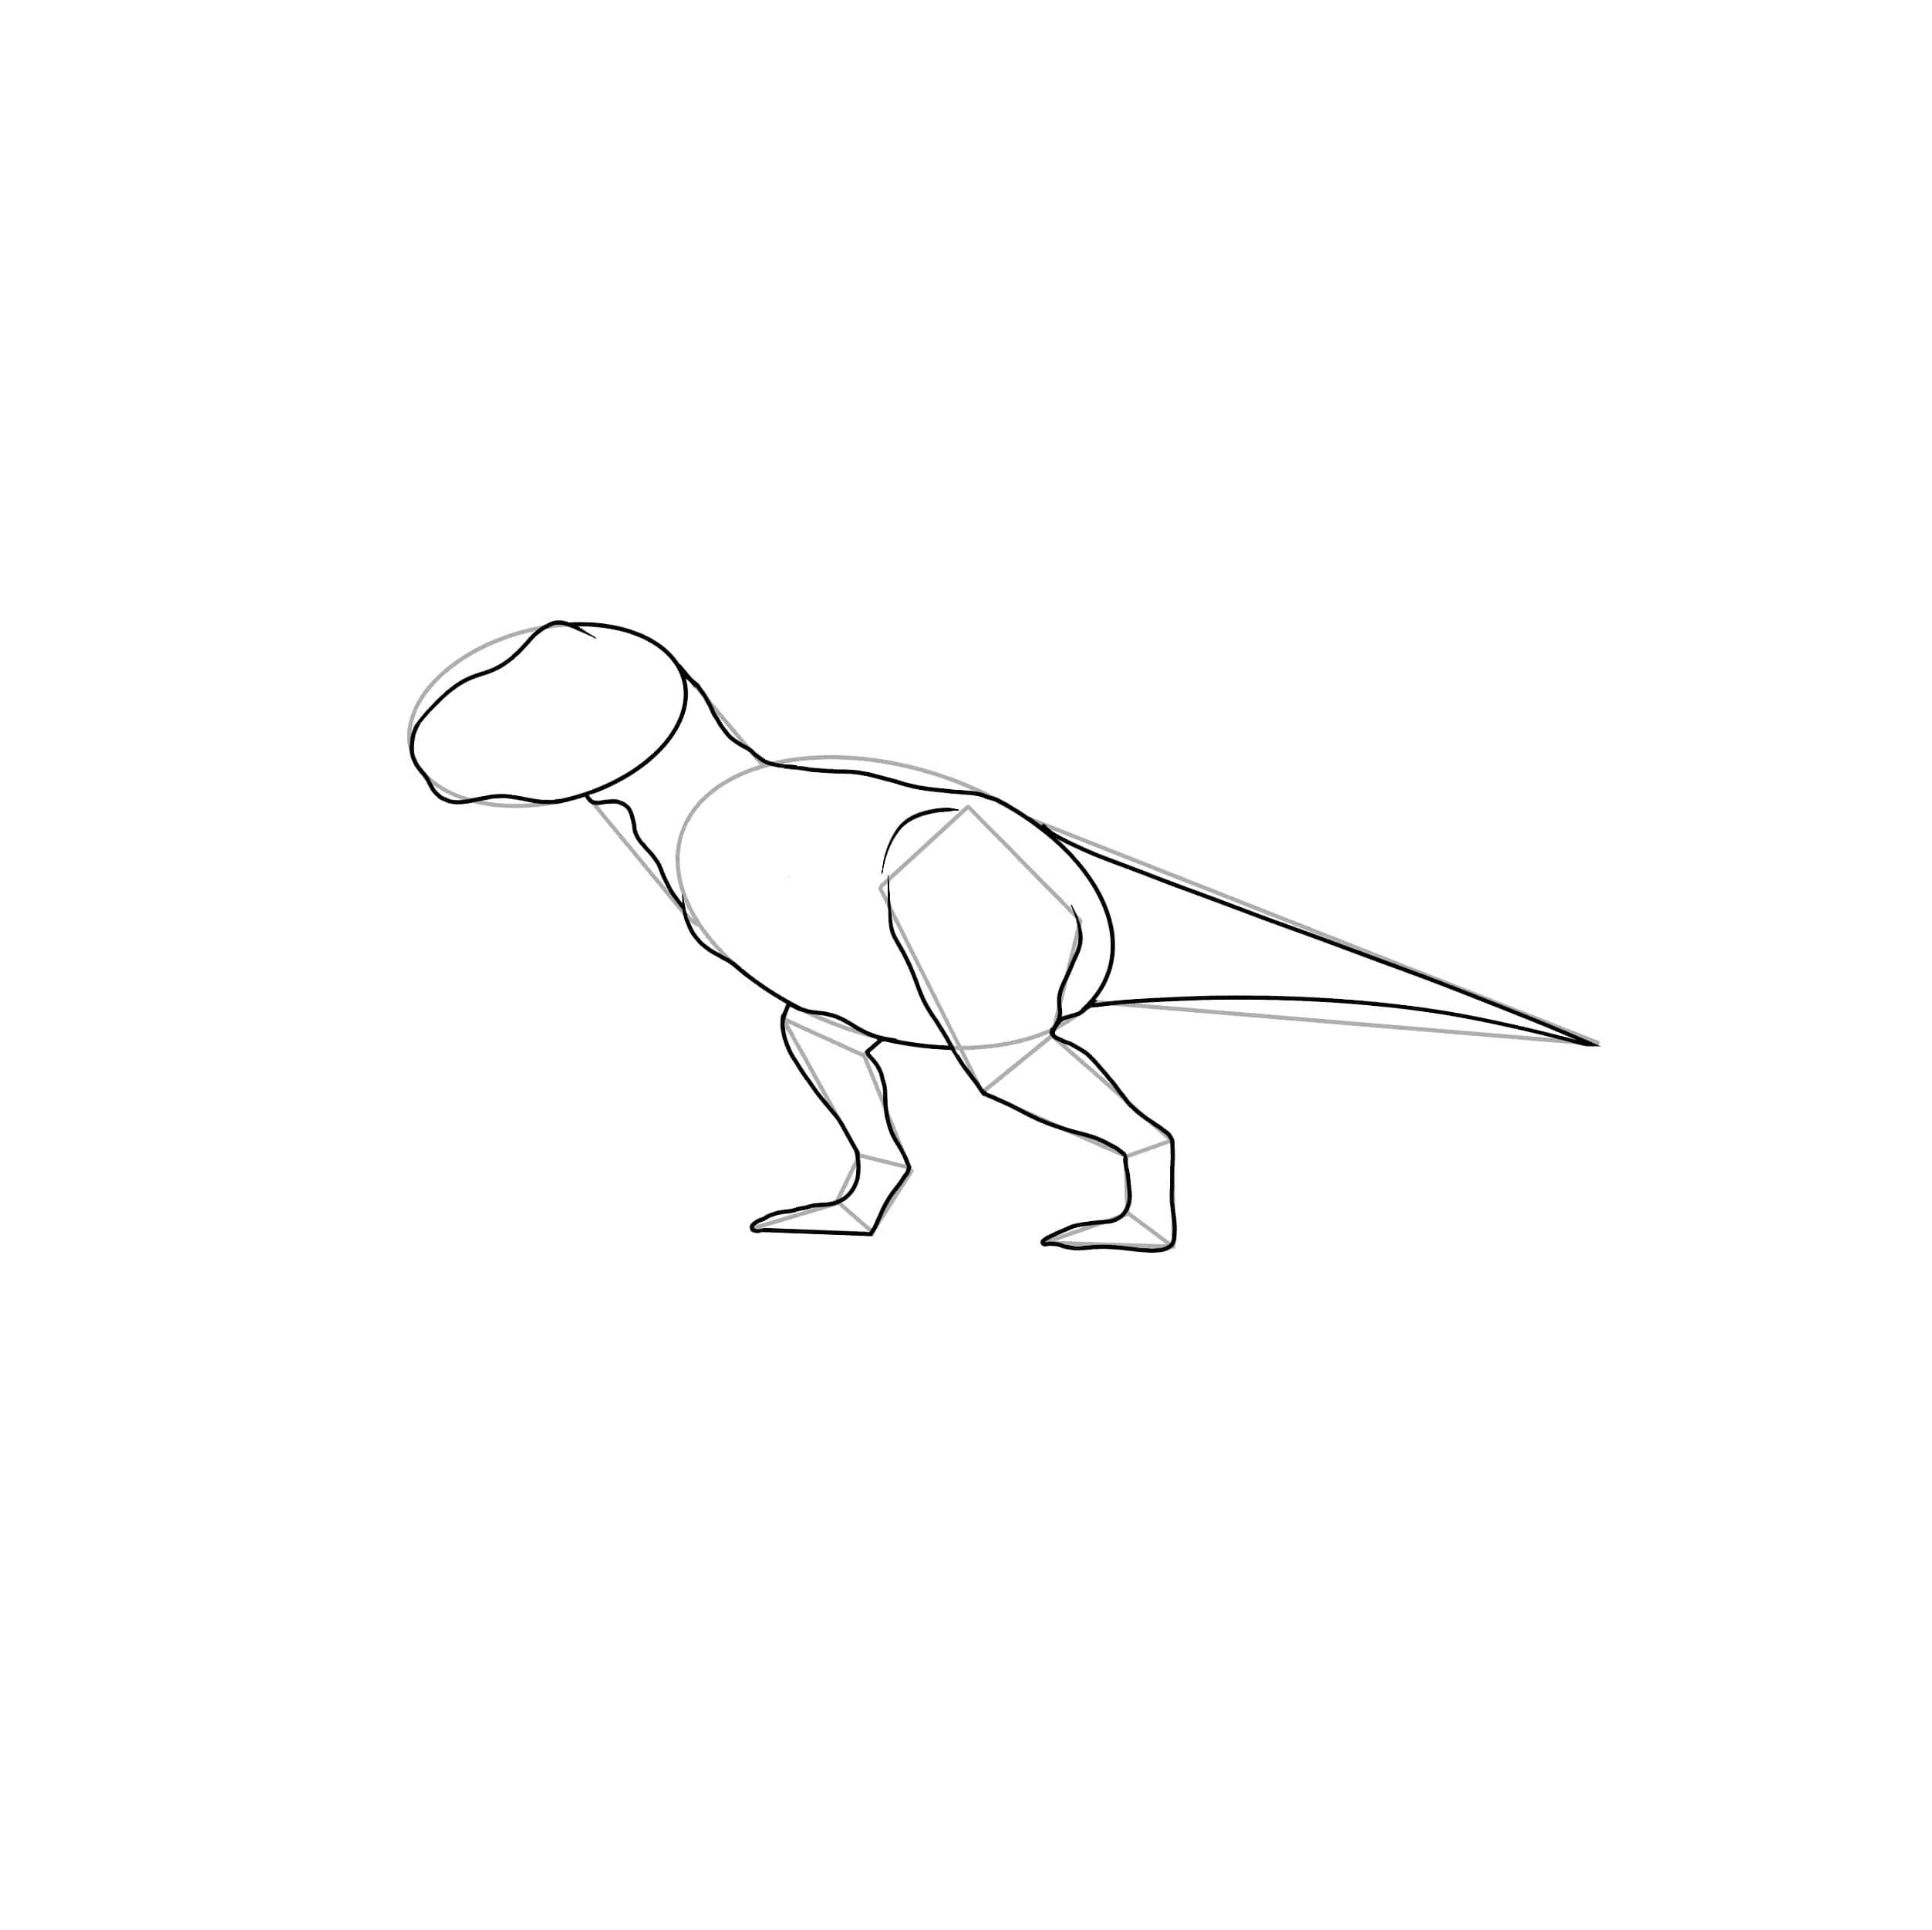 how to draw a realistic dinosaur step 2 erase outline and draw new lines for dinosaur head body feet and tail